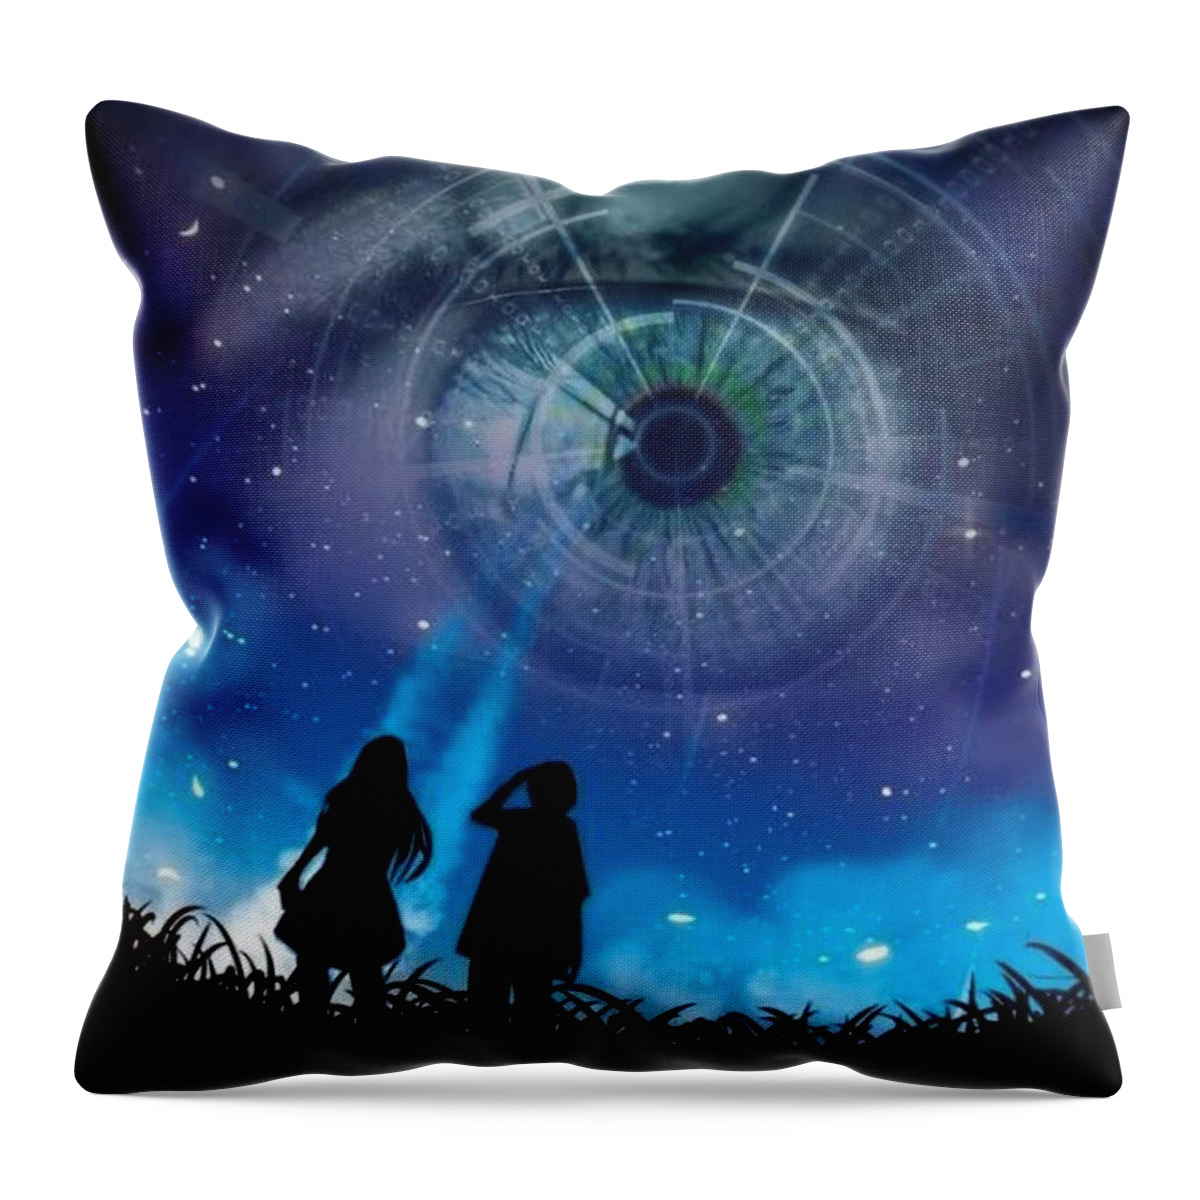 Surreal Throw Pillow featuring the mixed media I Have My Eye On You by Teresa Trotter